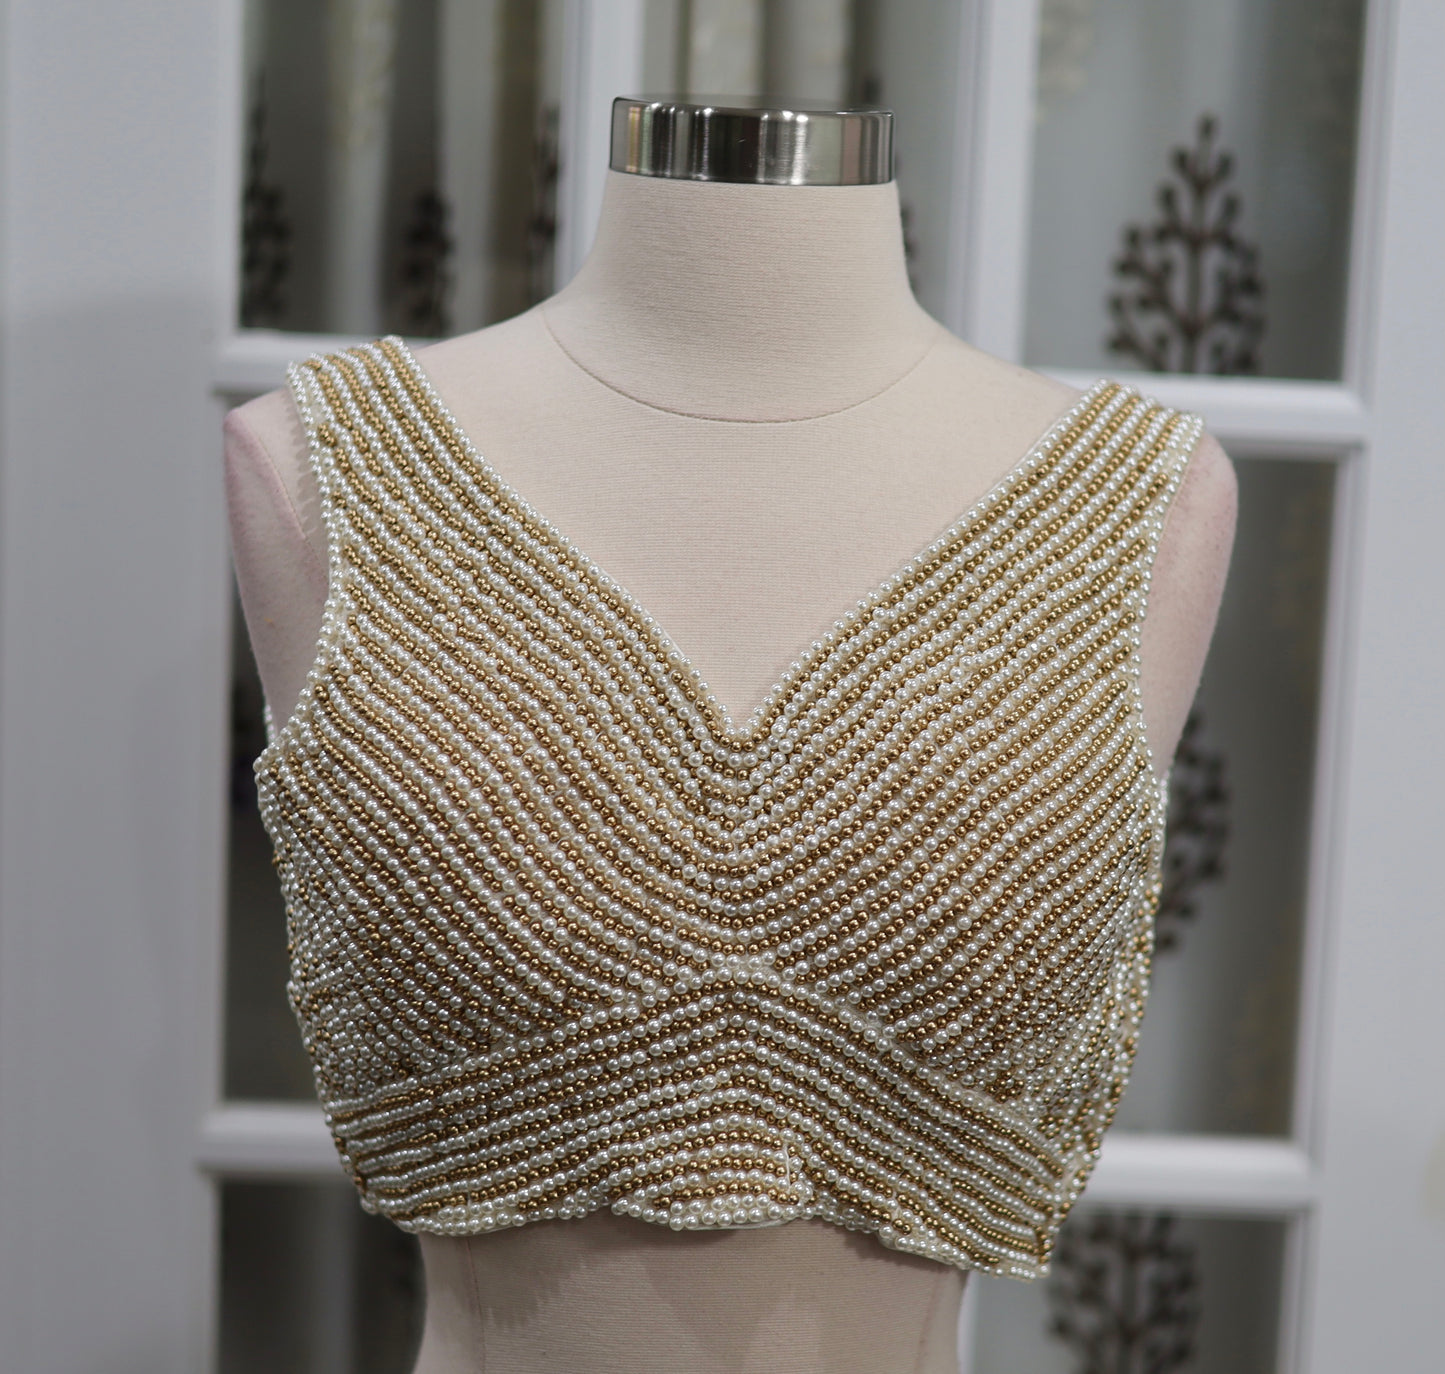 Elegant Bead work Blouse across entire blouse in Gold and Pearl color